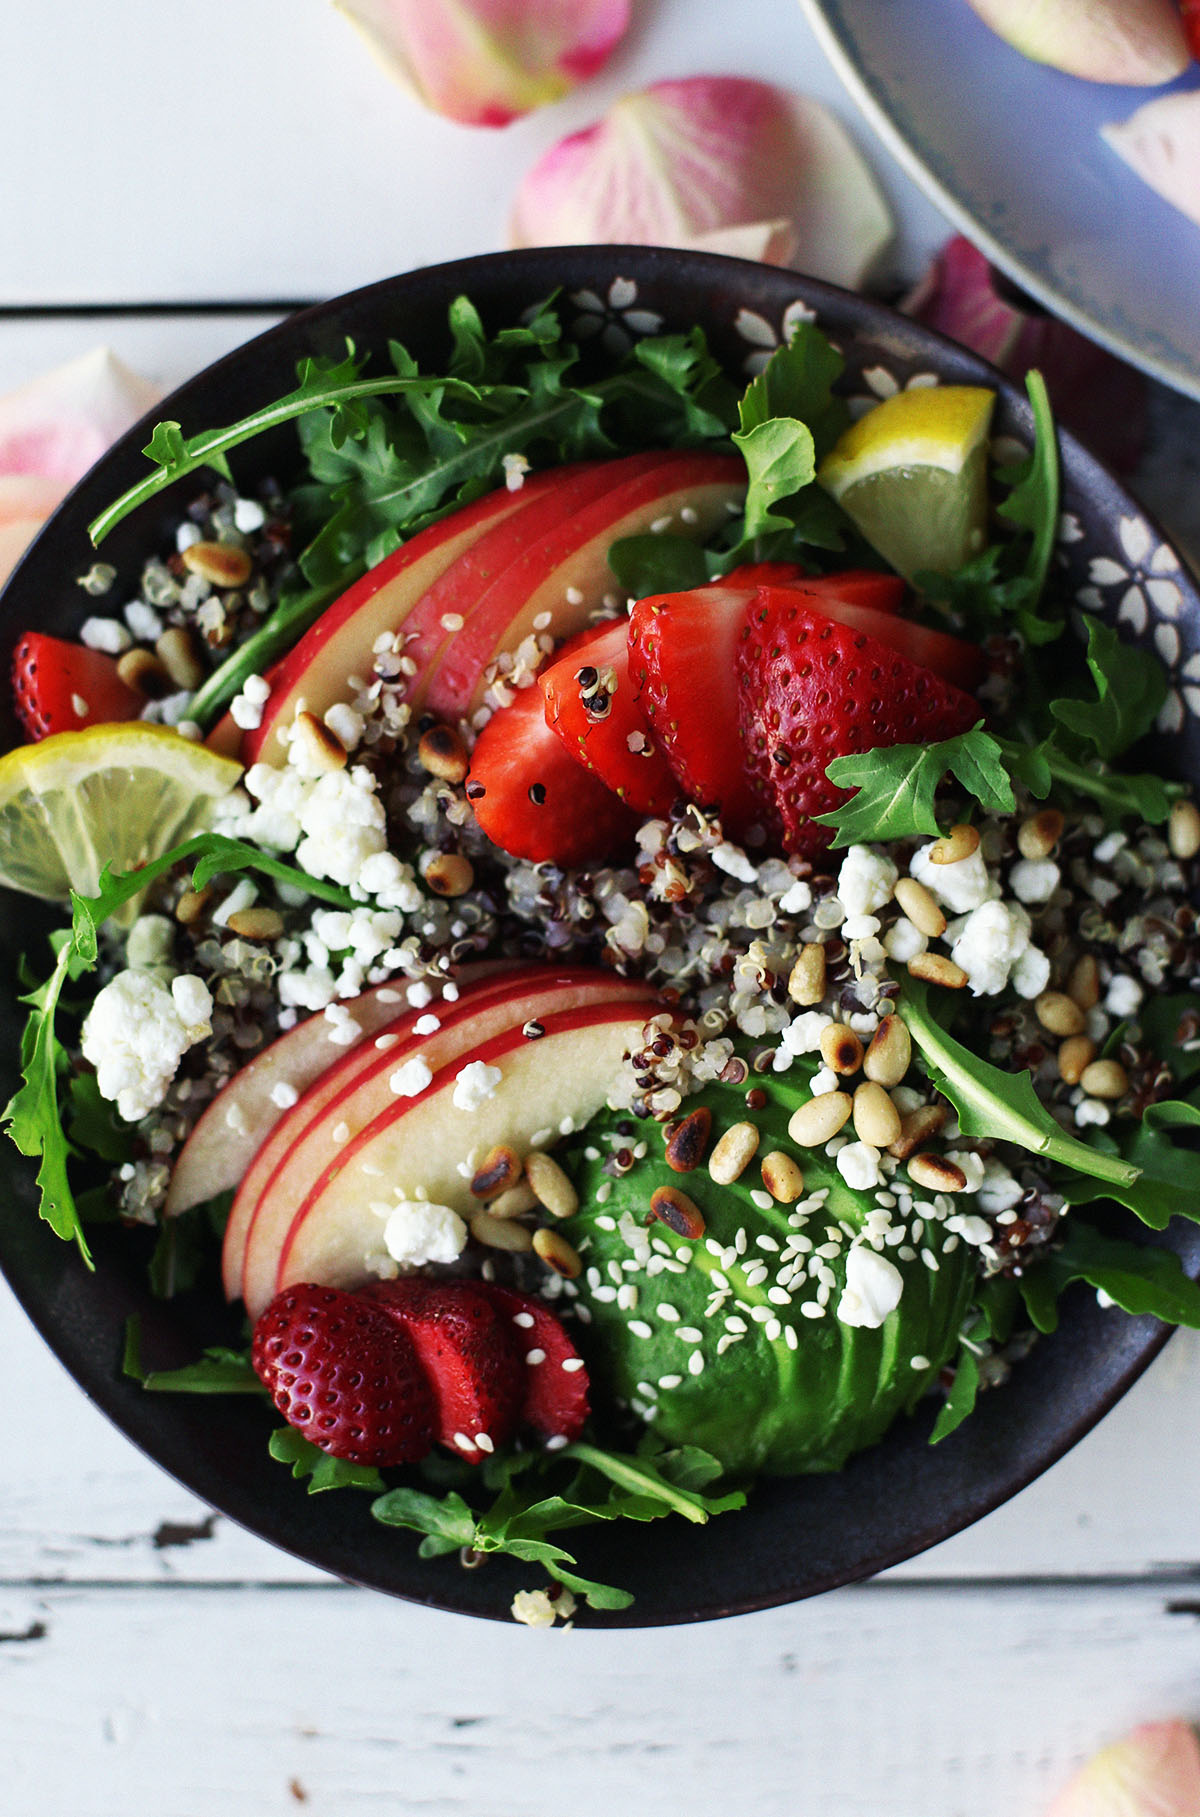 Strawberry Goat Cheese Quinoa and Arugula Salad With Balsamic Dressing